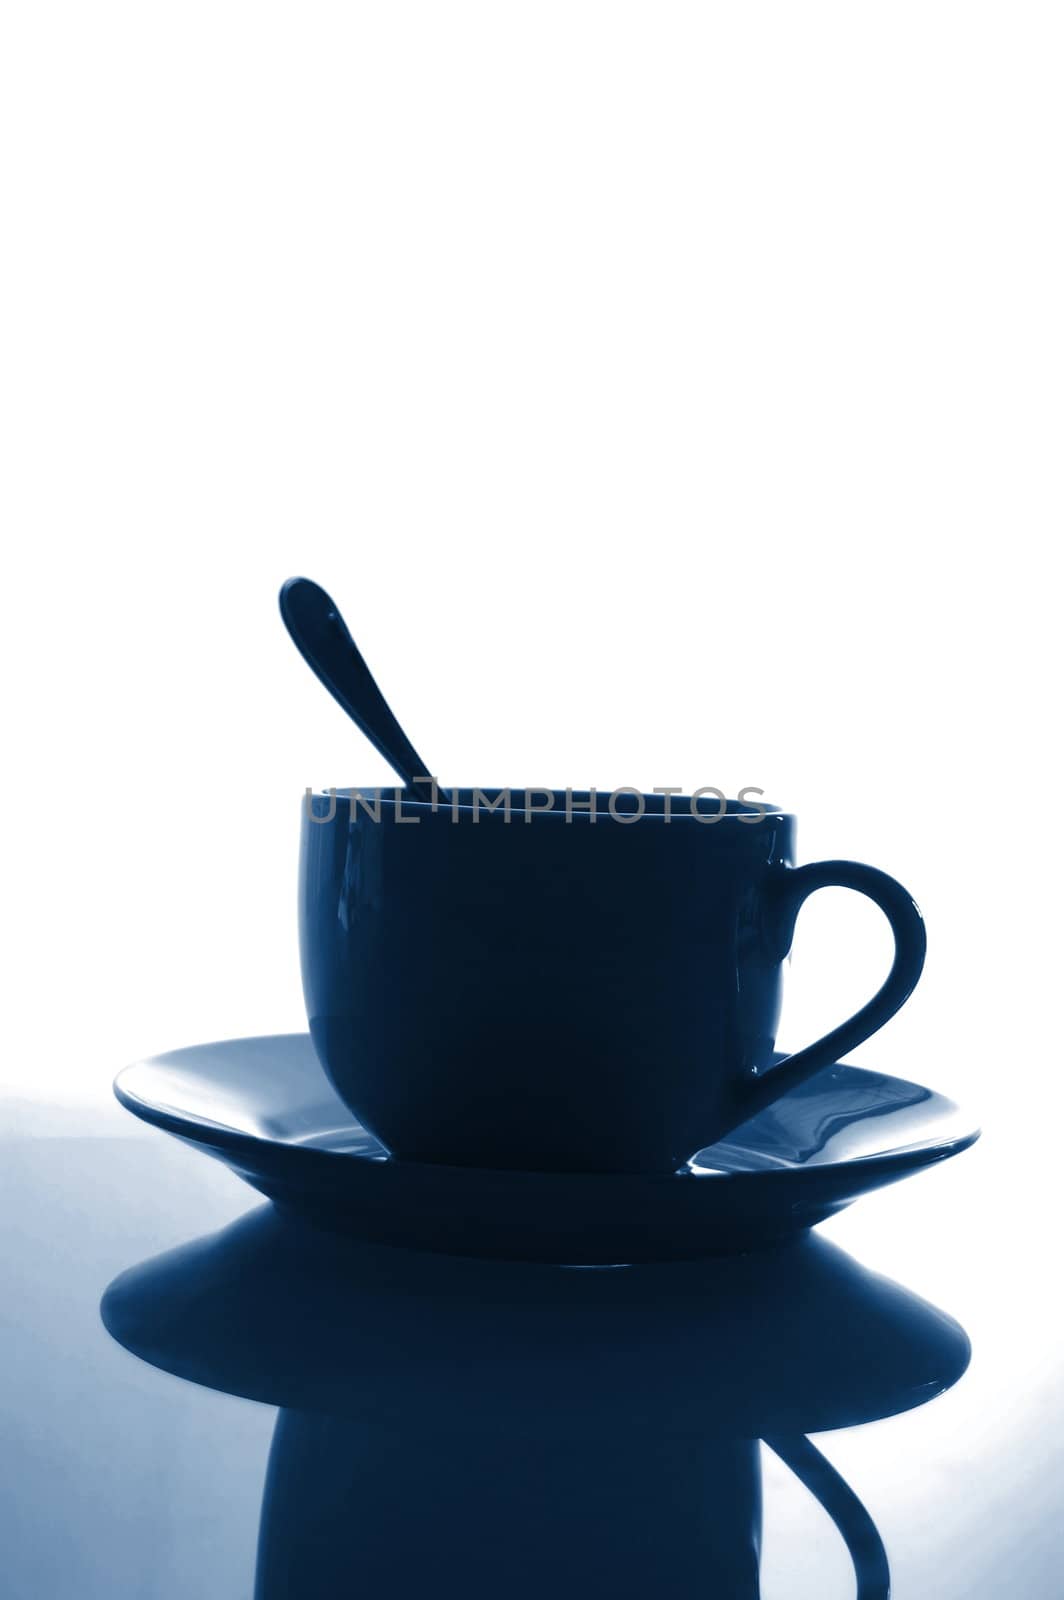 cup of coffee with copyspace for text message